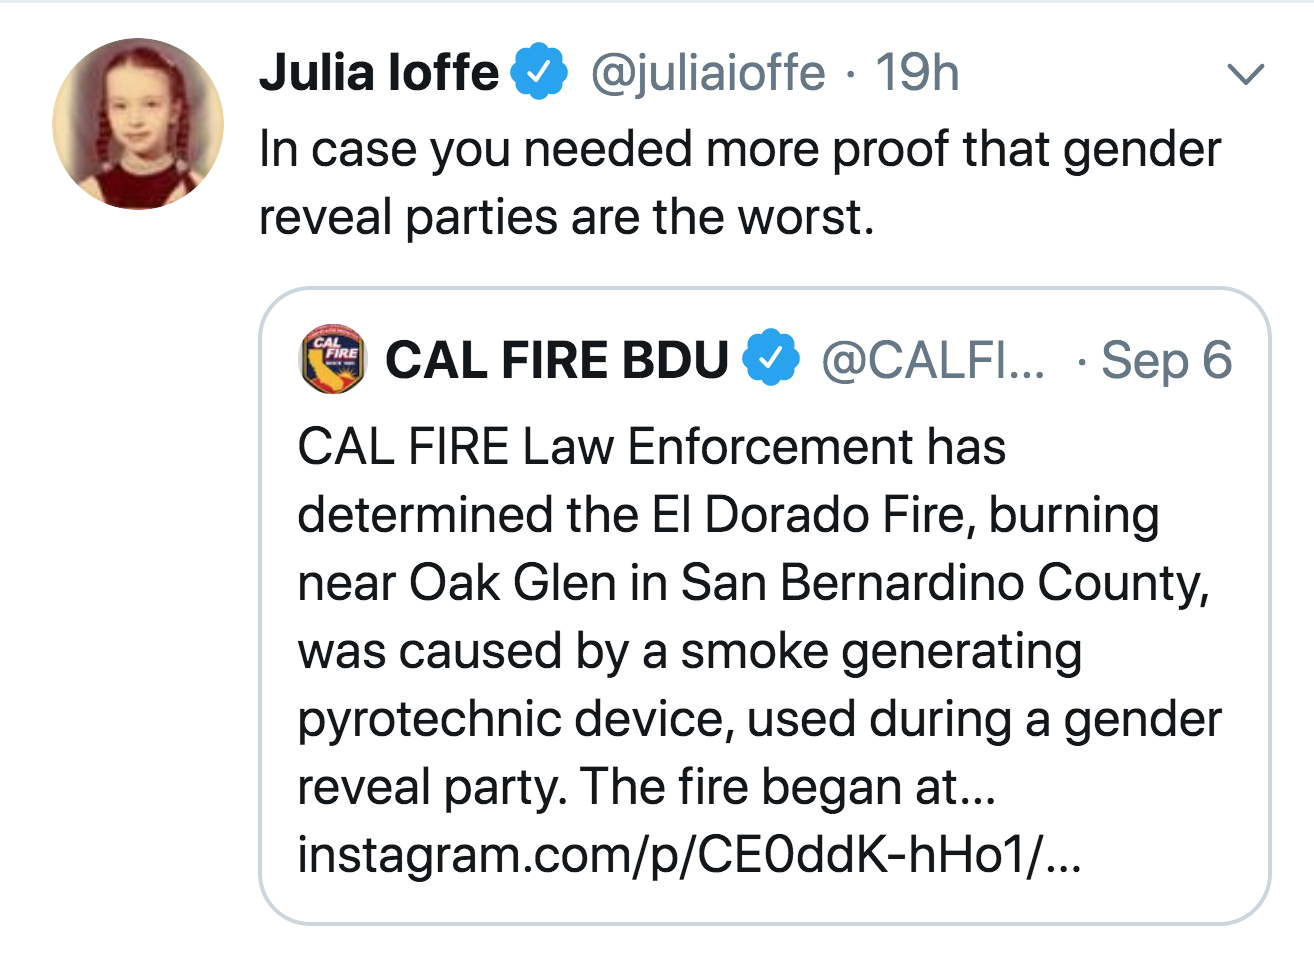 document - Julia loffe 19h In case you needed more proof that gender reveal parties are the worst. Cal Cal Fire Bdu ... Sep 6 Cal Fire Law Enforcement has determined the El Dorado Fire, burning near Oak Glen in San Bernardino County, was caused by a smoke